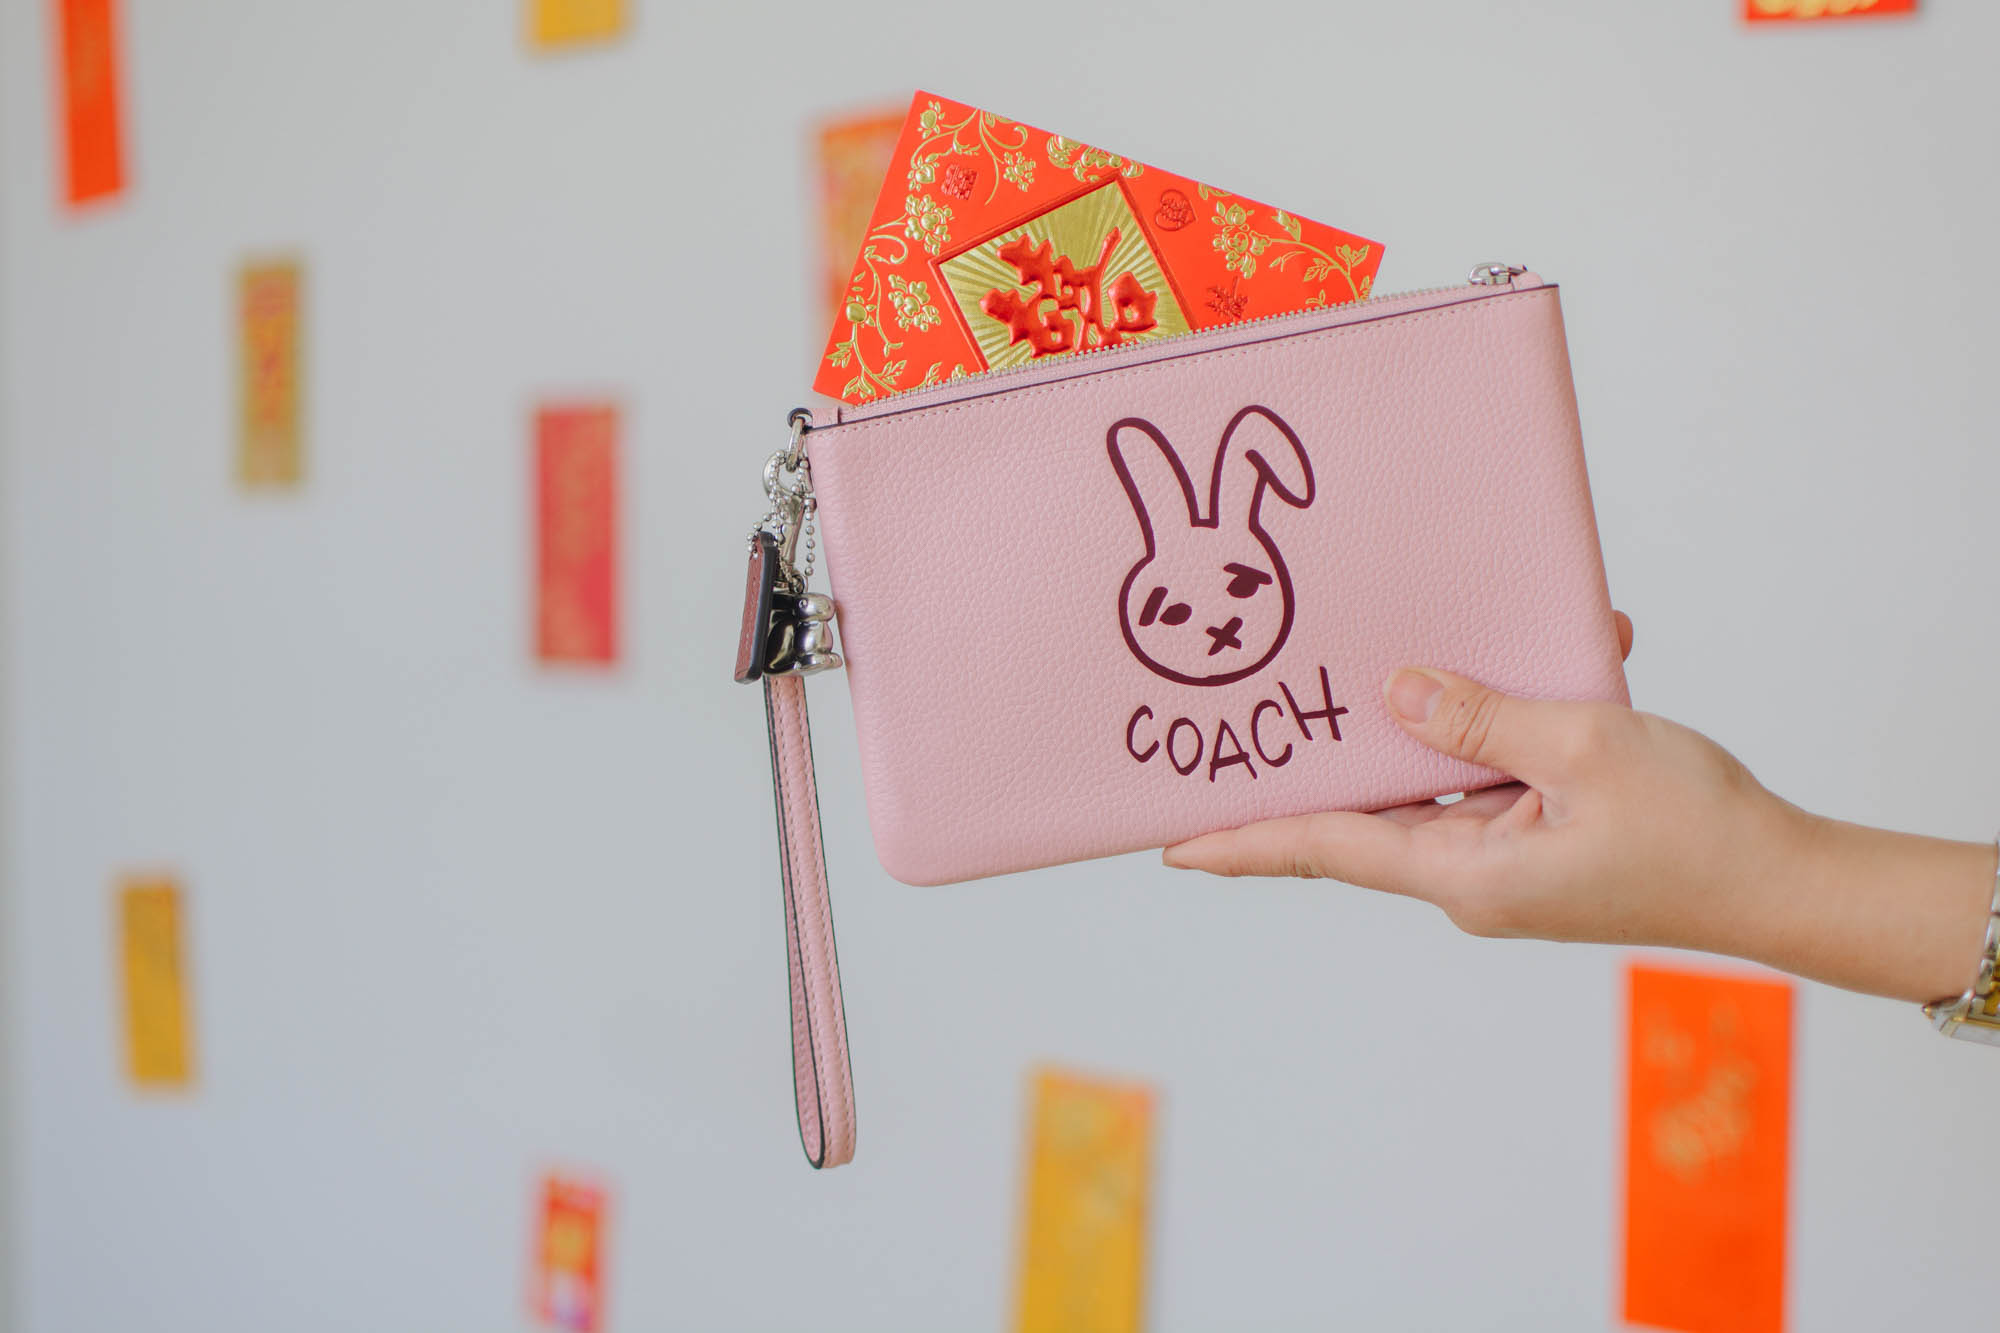 Demi Bang hosts a giveaway with Scottsdale Fashion Square to gift a limited-edition rabbit Coach wristlet for Lunar New Year.